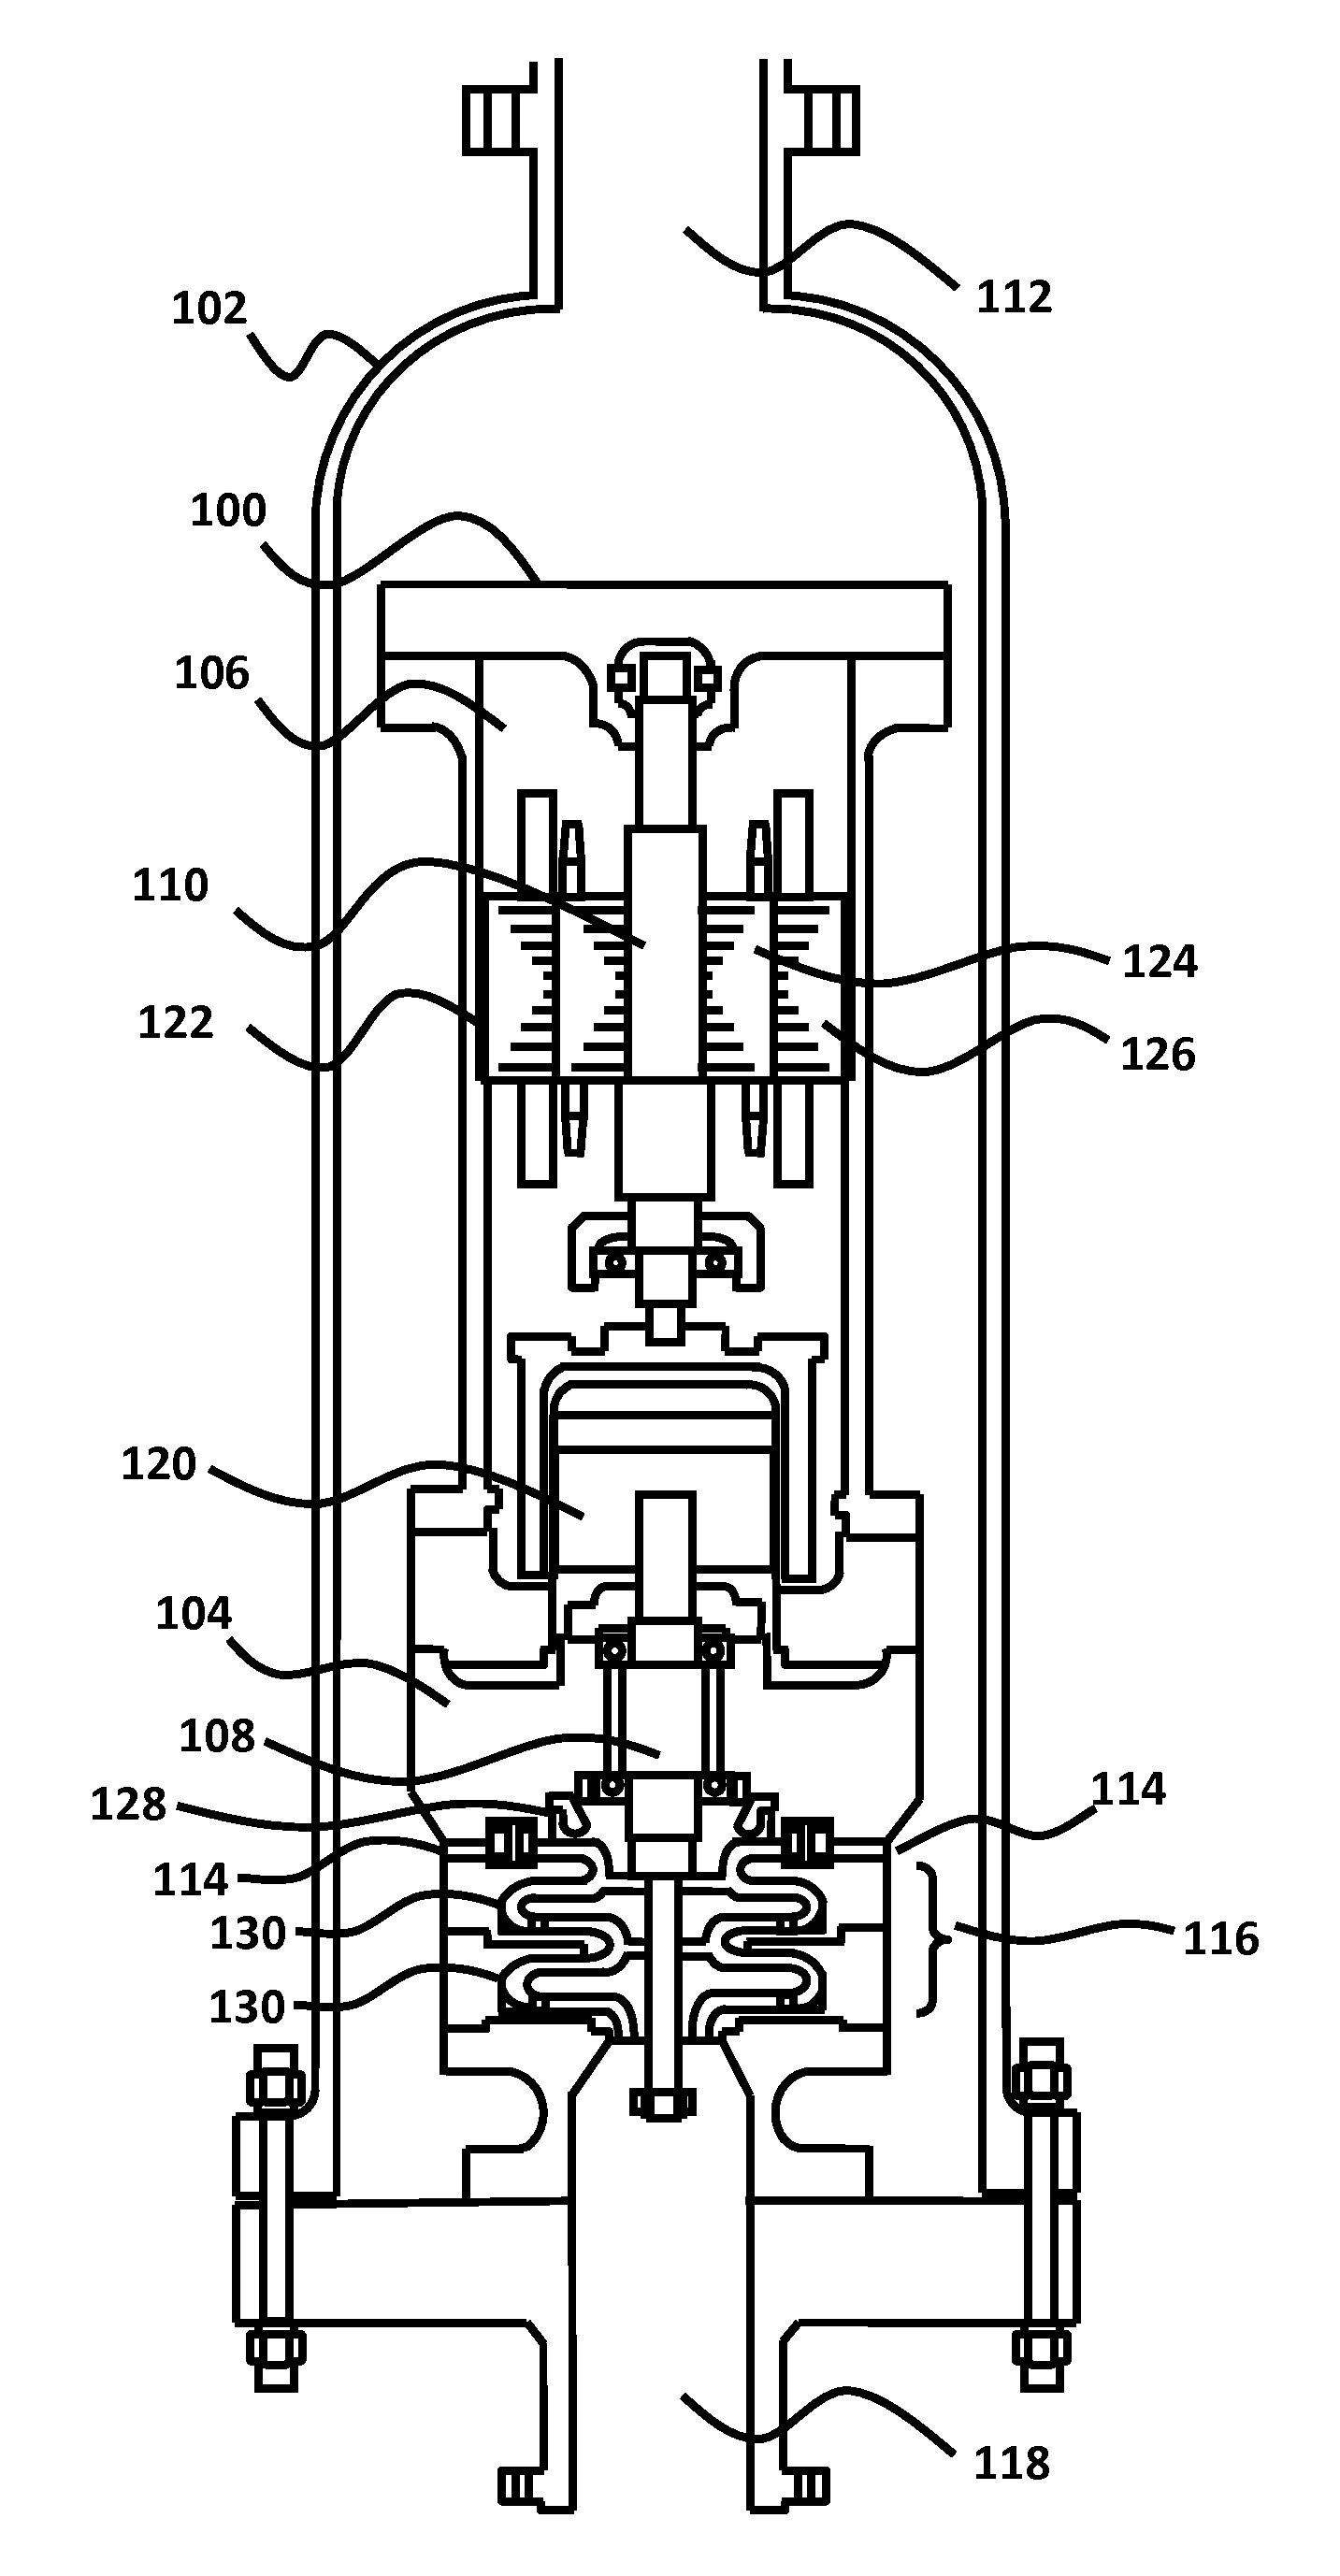 Multistage liquefied gas expander with variable geometry hydraulic stages